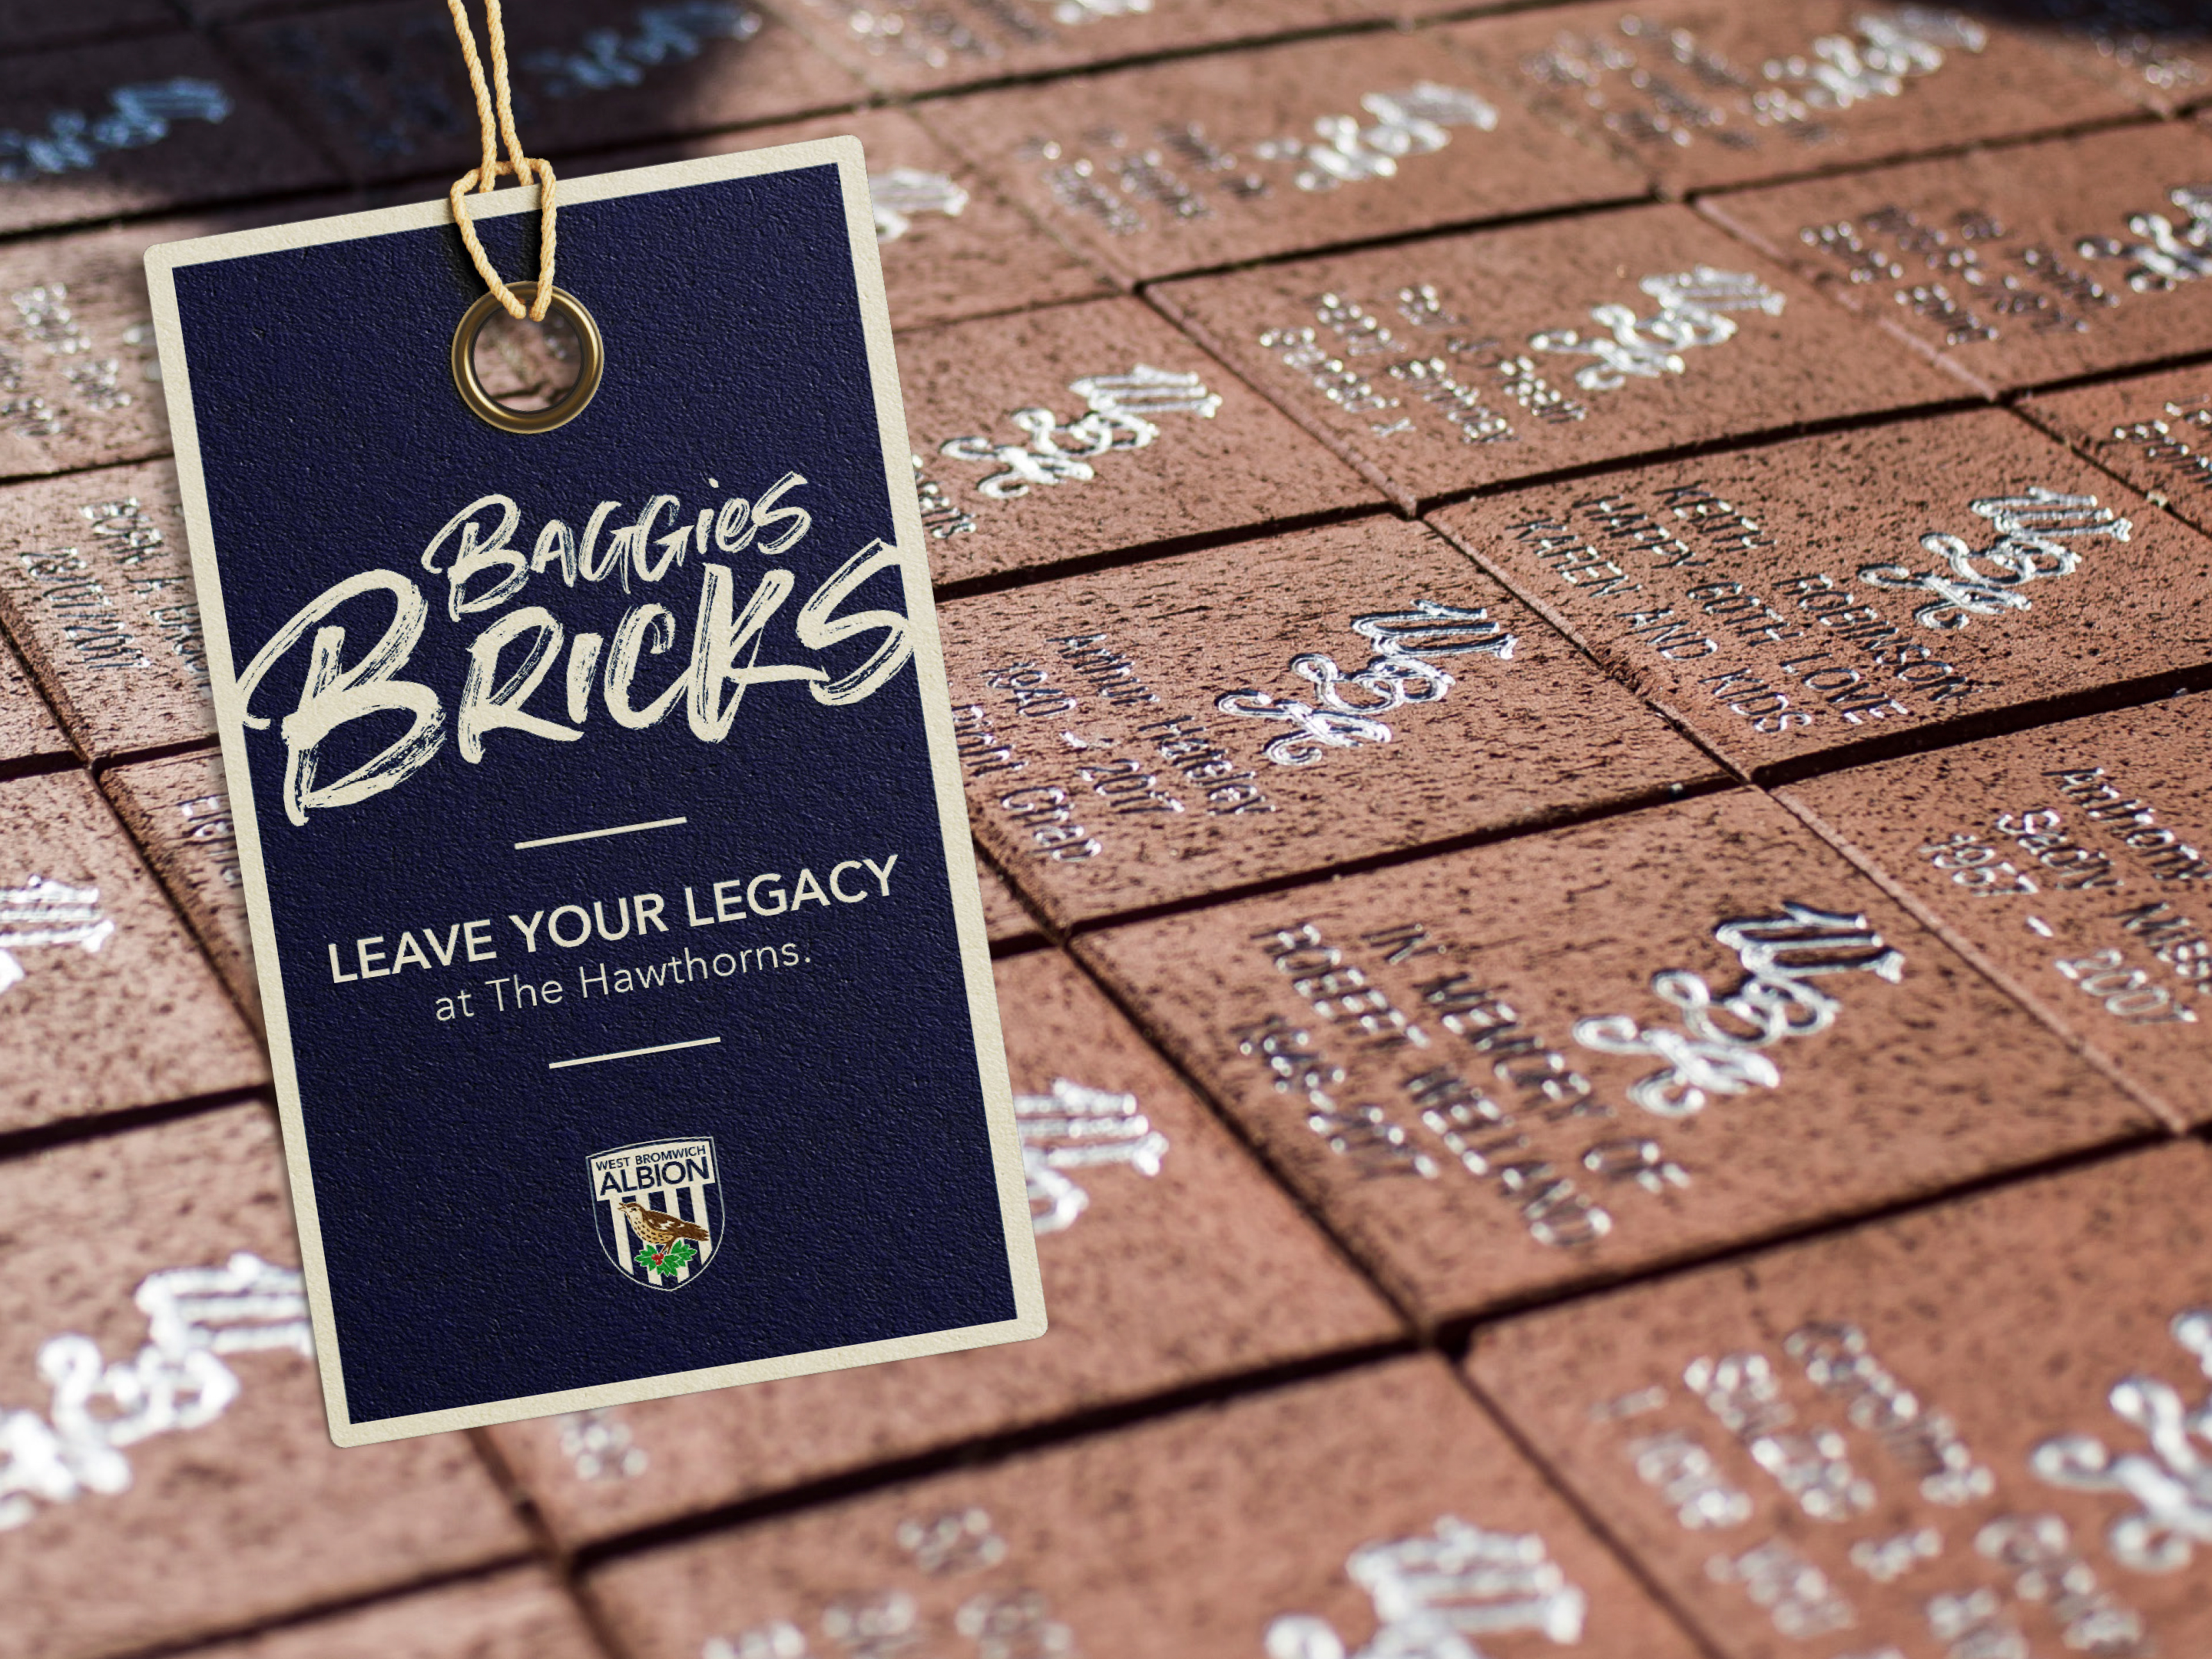 Leave your Legacy on the Baggies Brick Road